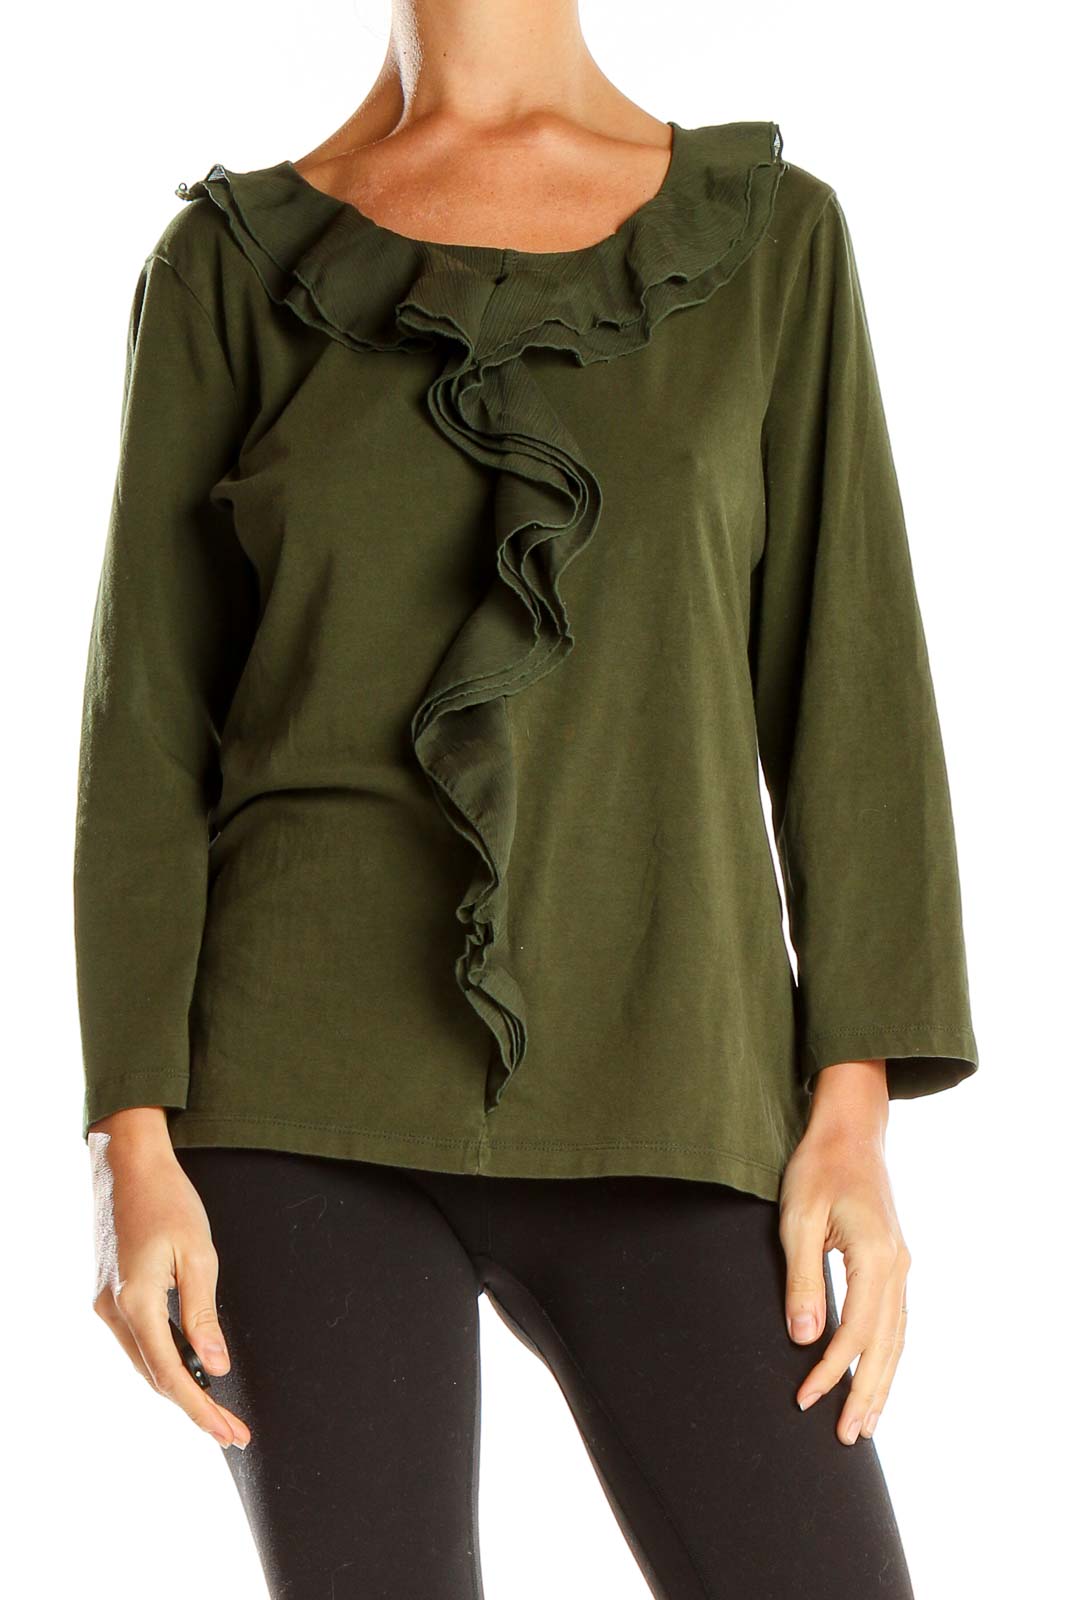 Green Ruffle Blouse Front